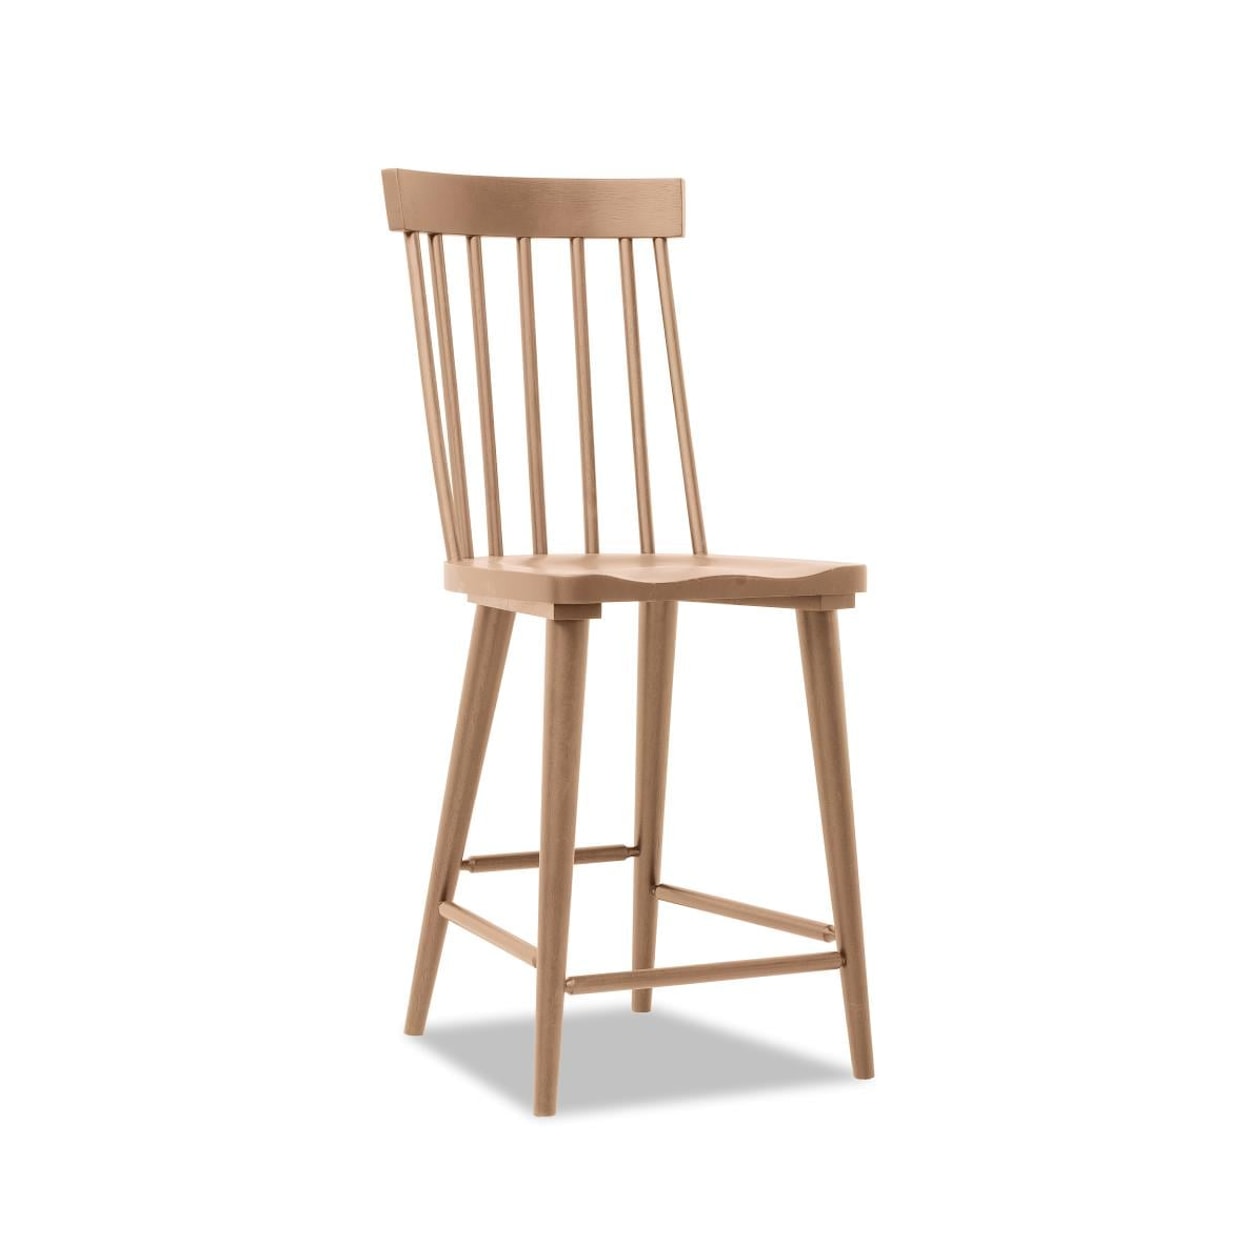 Trisha Yearwood Home Collection by Legacy Classic Today's Traditions Windsor Counter Stool